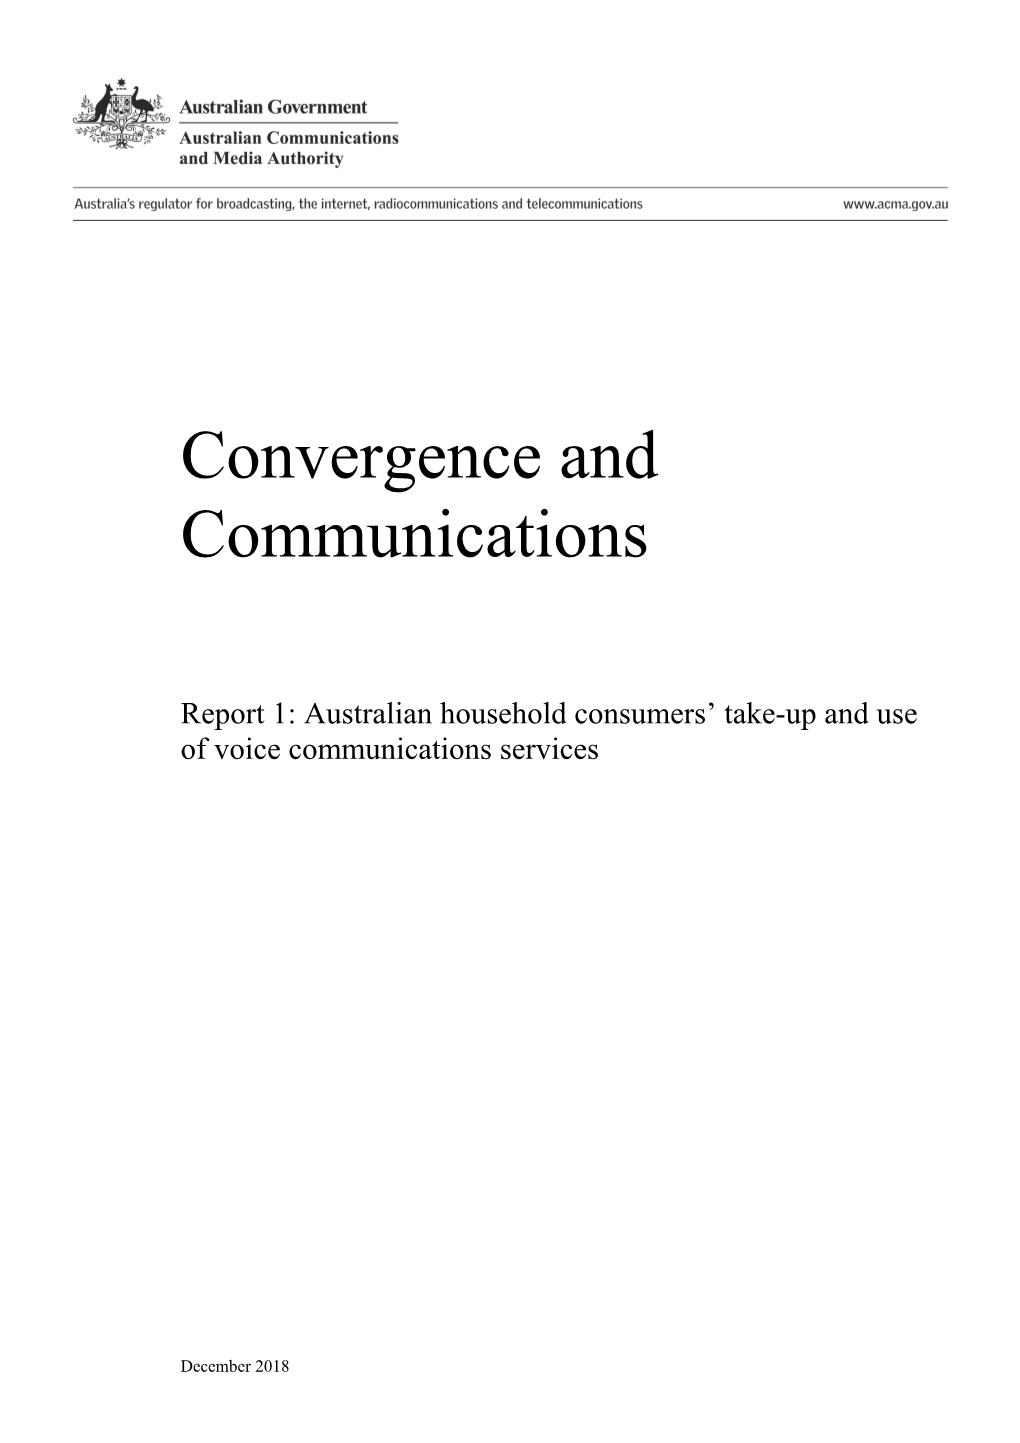 Convergence and Communications: Report 1 Australian Household Consumers' Take-Up and Use